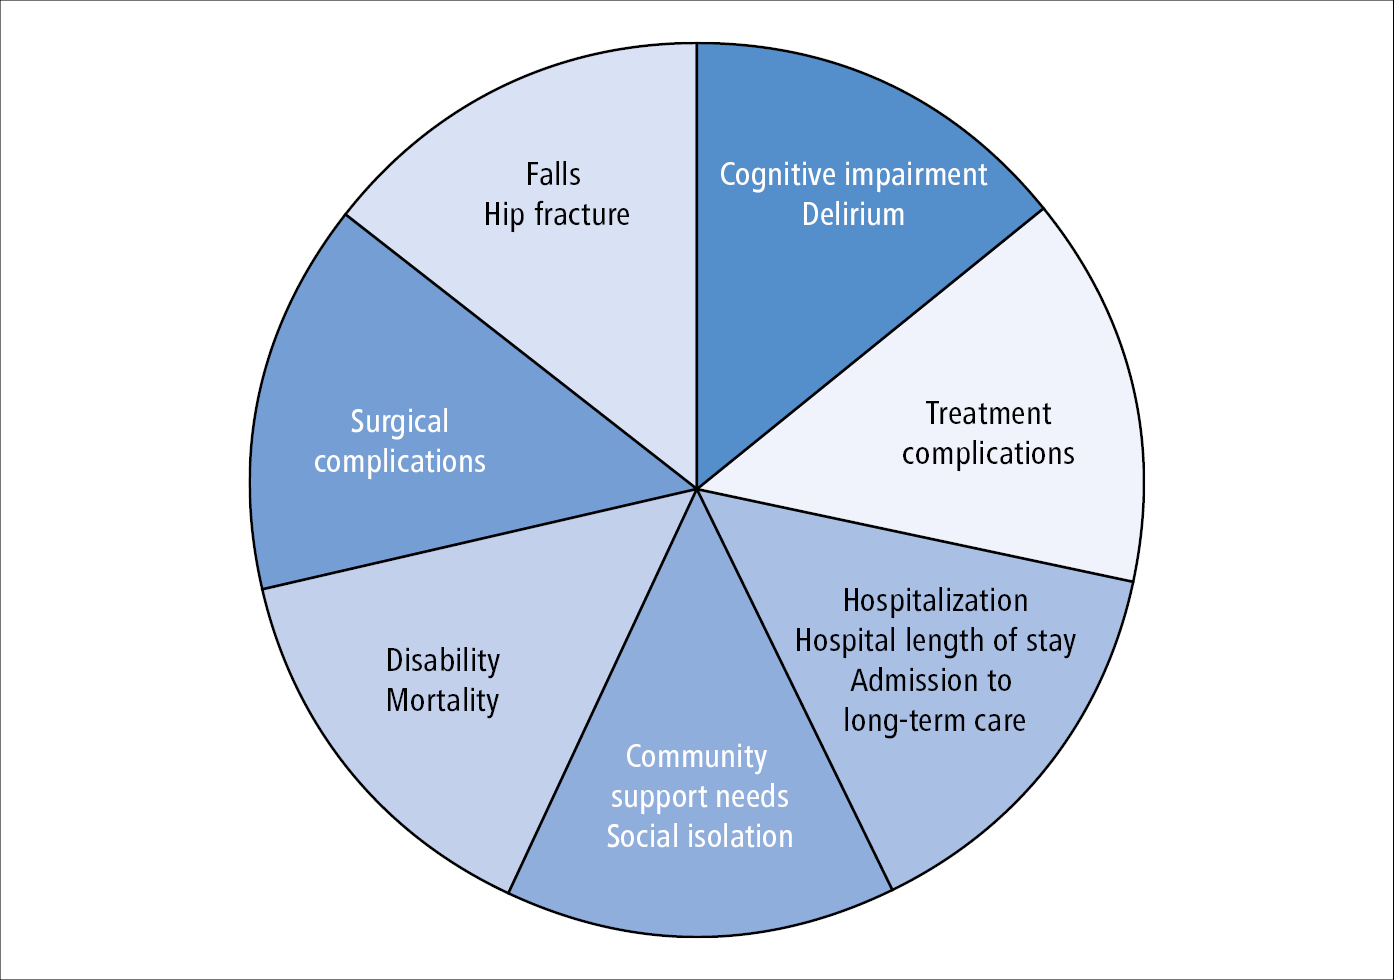 Figure 031_5567.  Patient and system-level outcomes of frailty. With increased frailty patients may experience increased rates of these outcomes. 